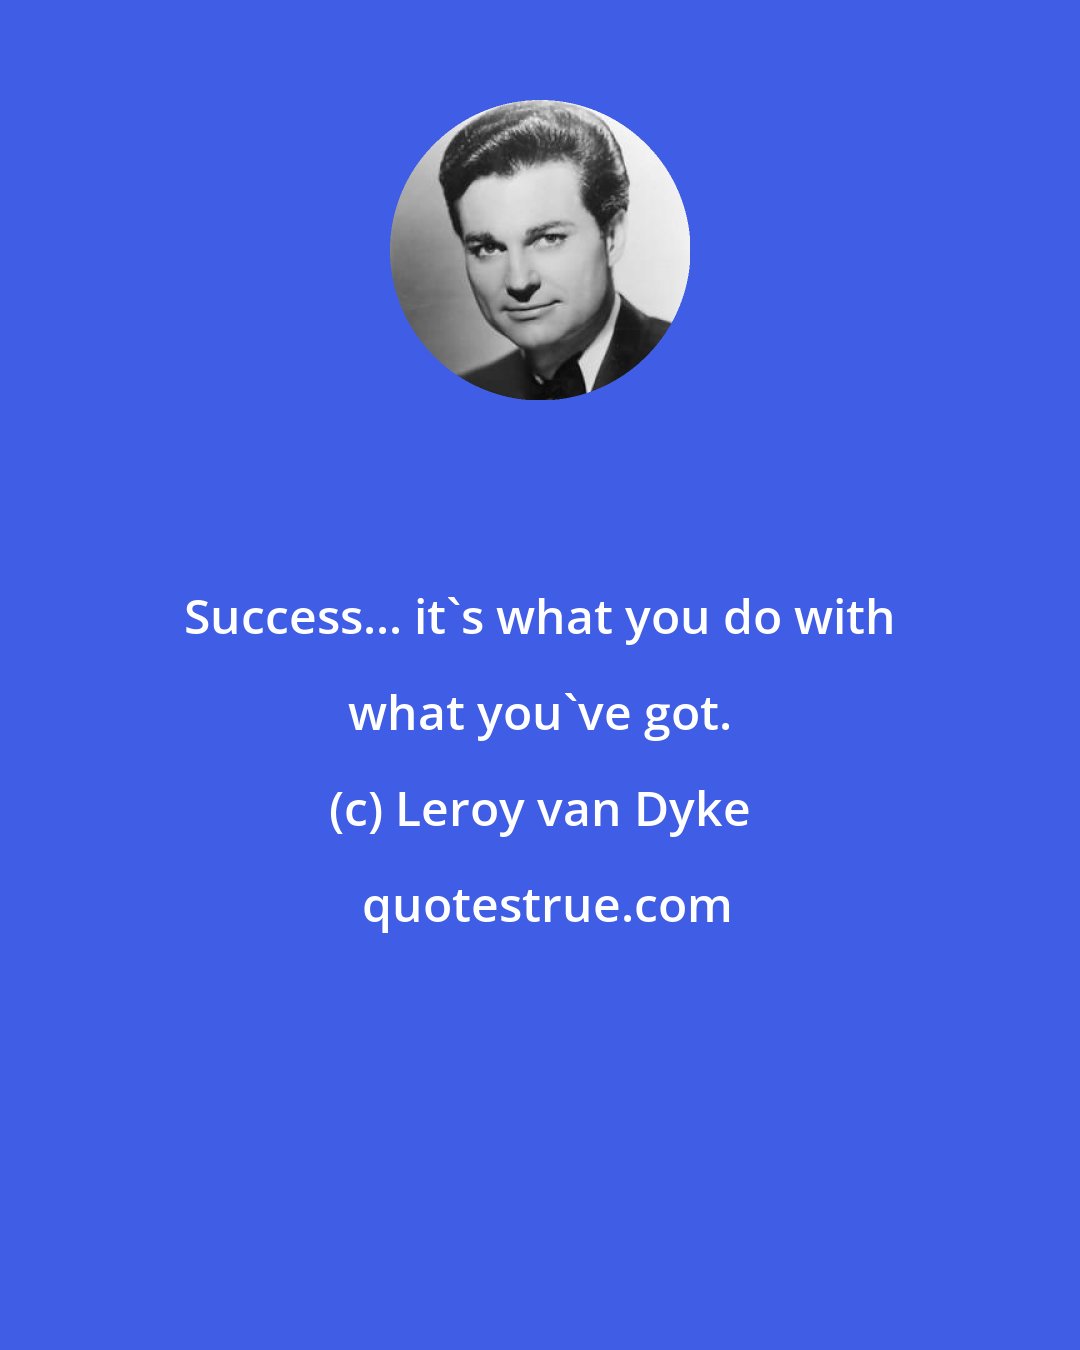 Leroy van Dyke: Success... it's what you do with what you've got.